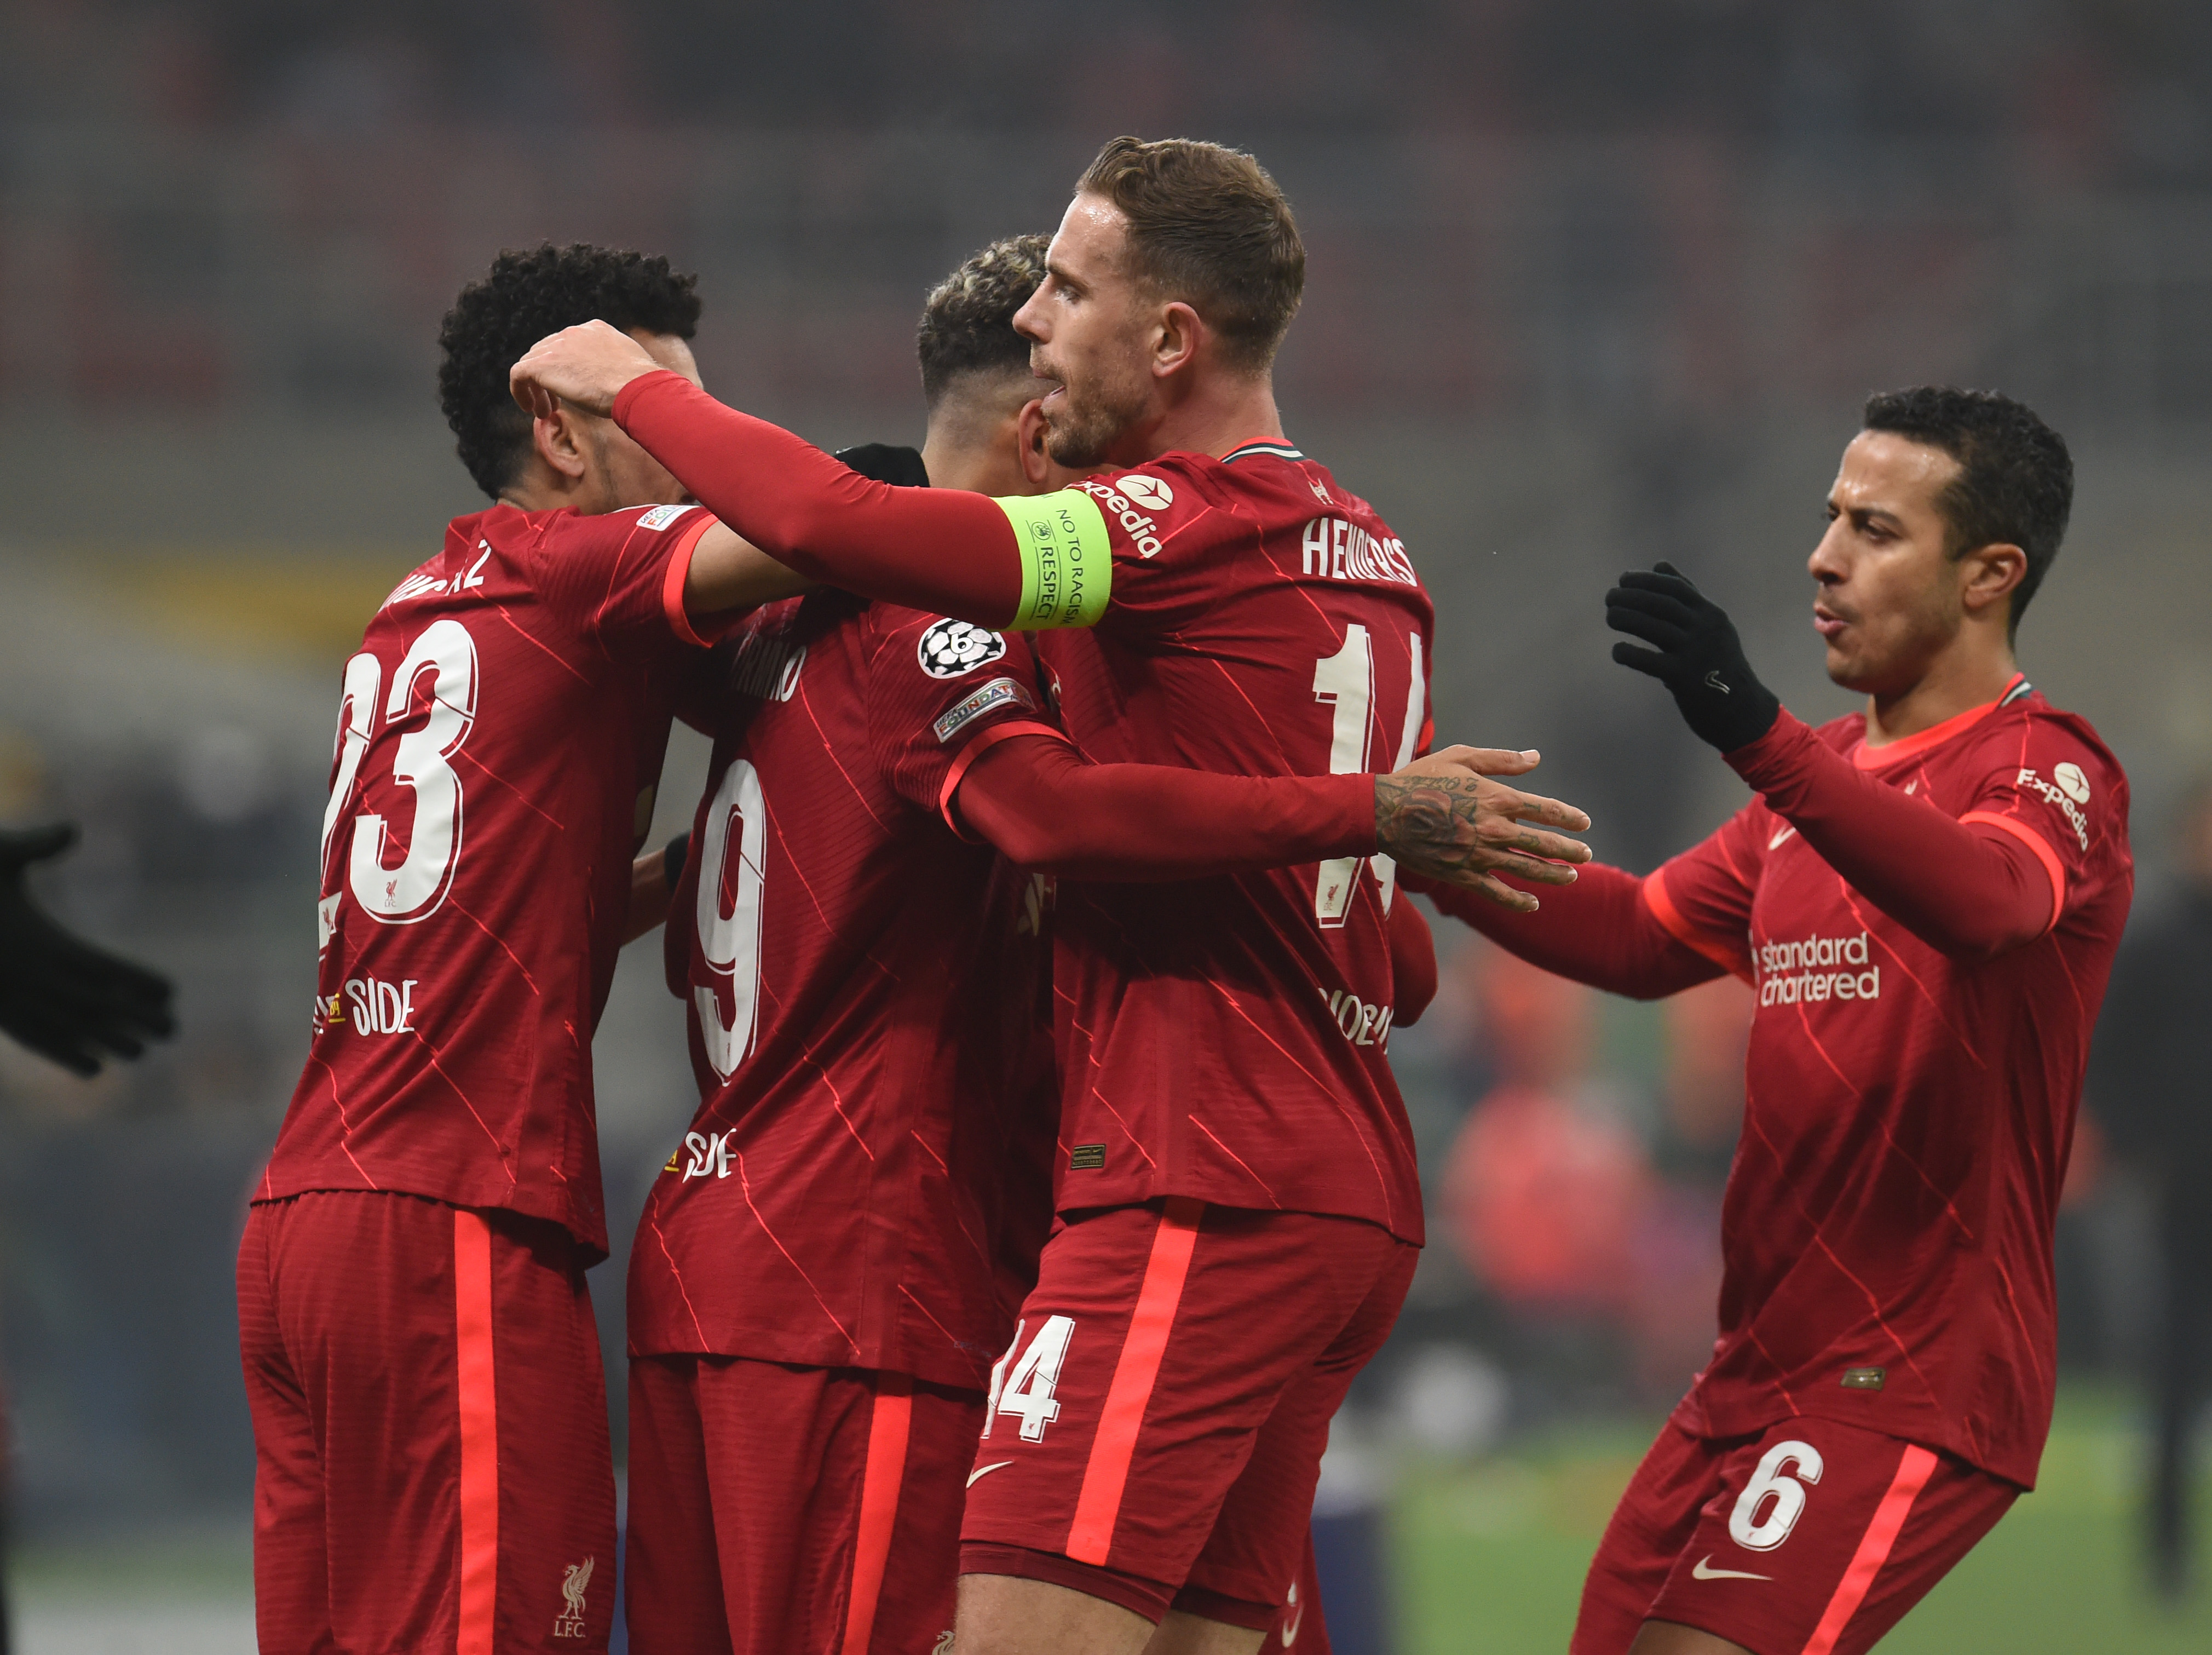 Inter Milan 0-2 Liverpool Highlights: Liverpool score two second-half goals through Firmino and Mo Salah to beat Inter in the 1st Leg of the Last 16